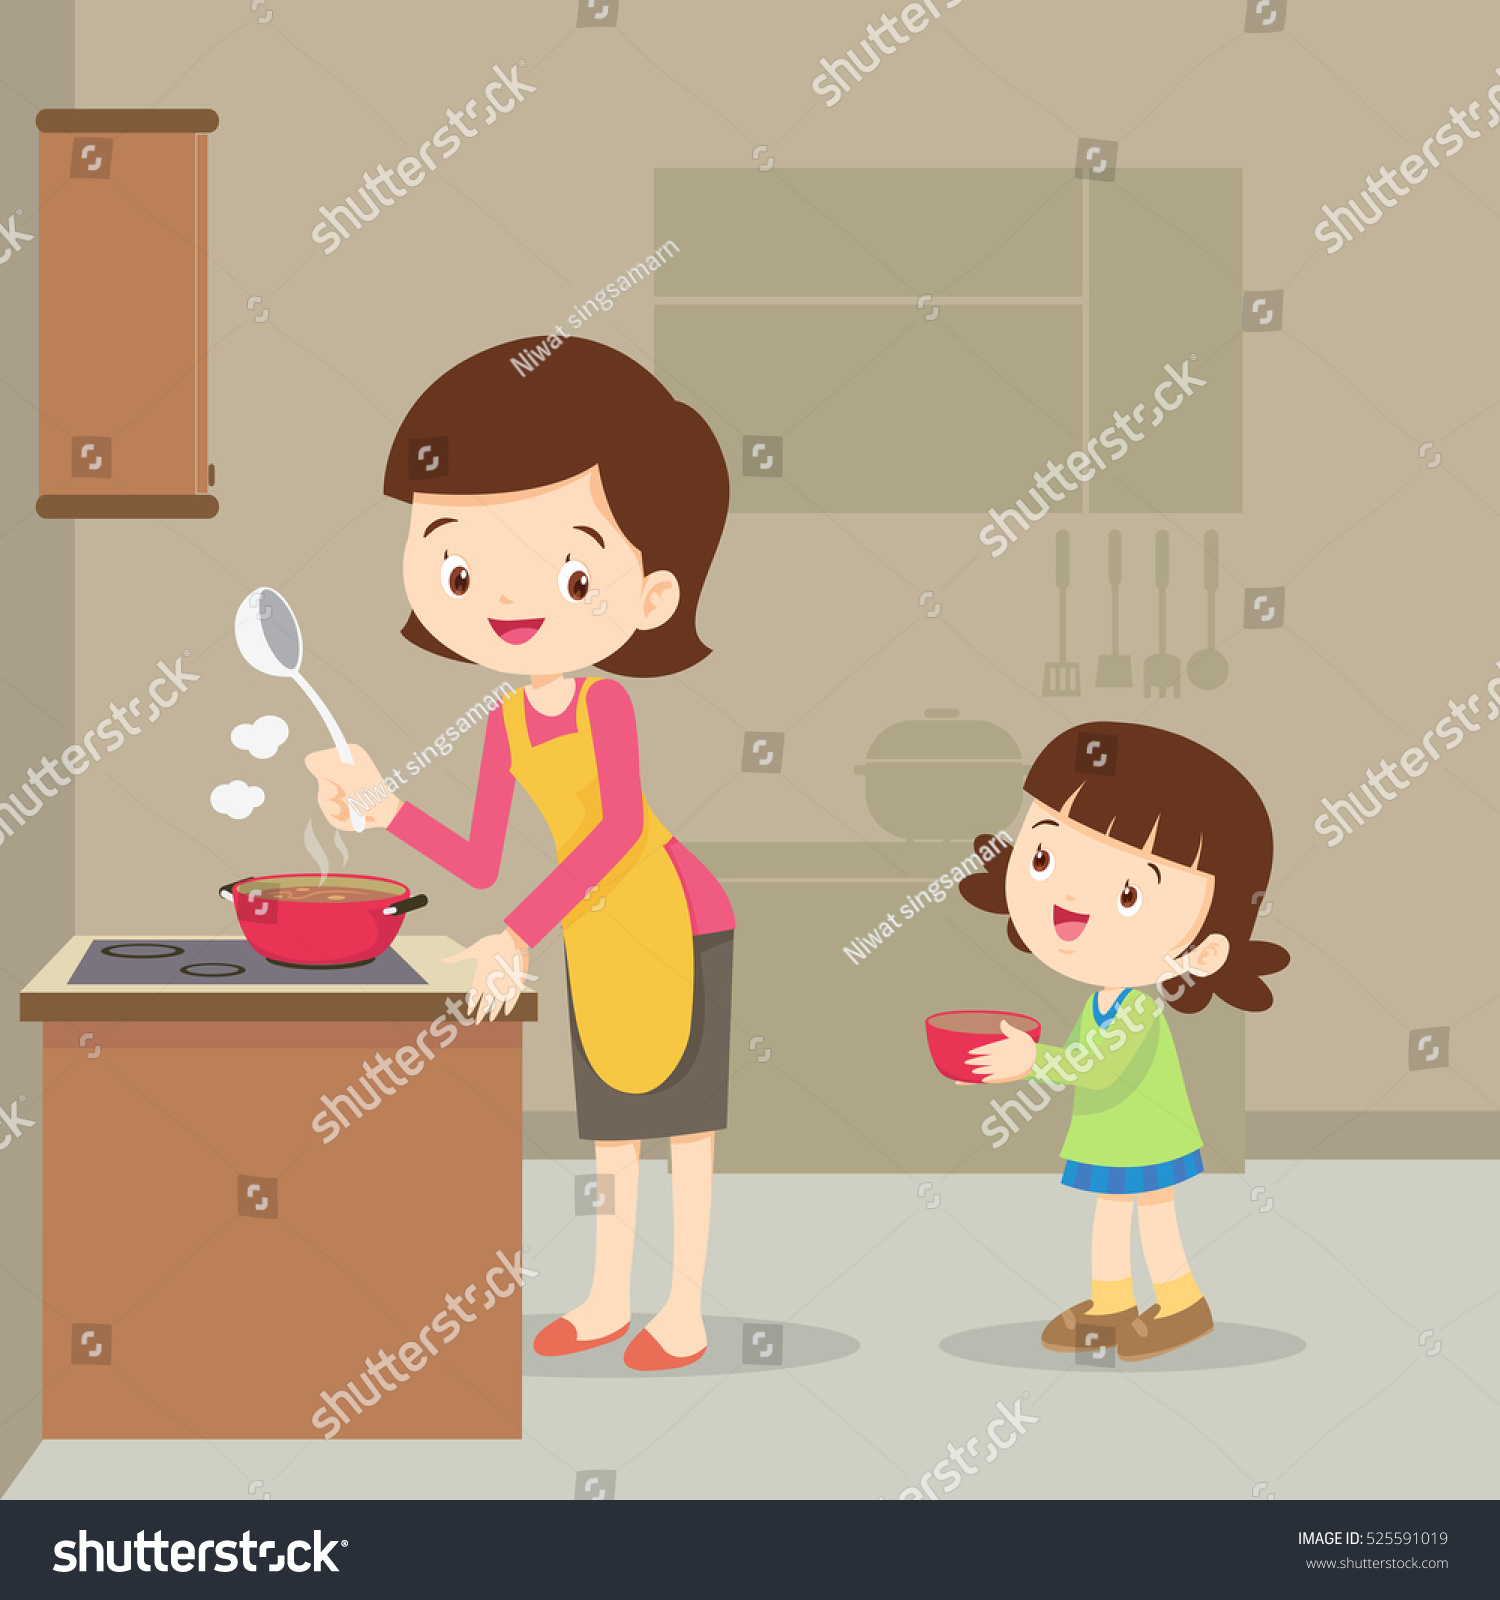 Vector Illustration Mother Daughter Cooking Stock Vector Royalty Free 525591019 Shutterstock 